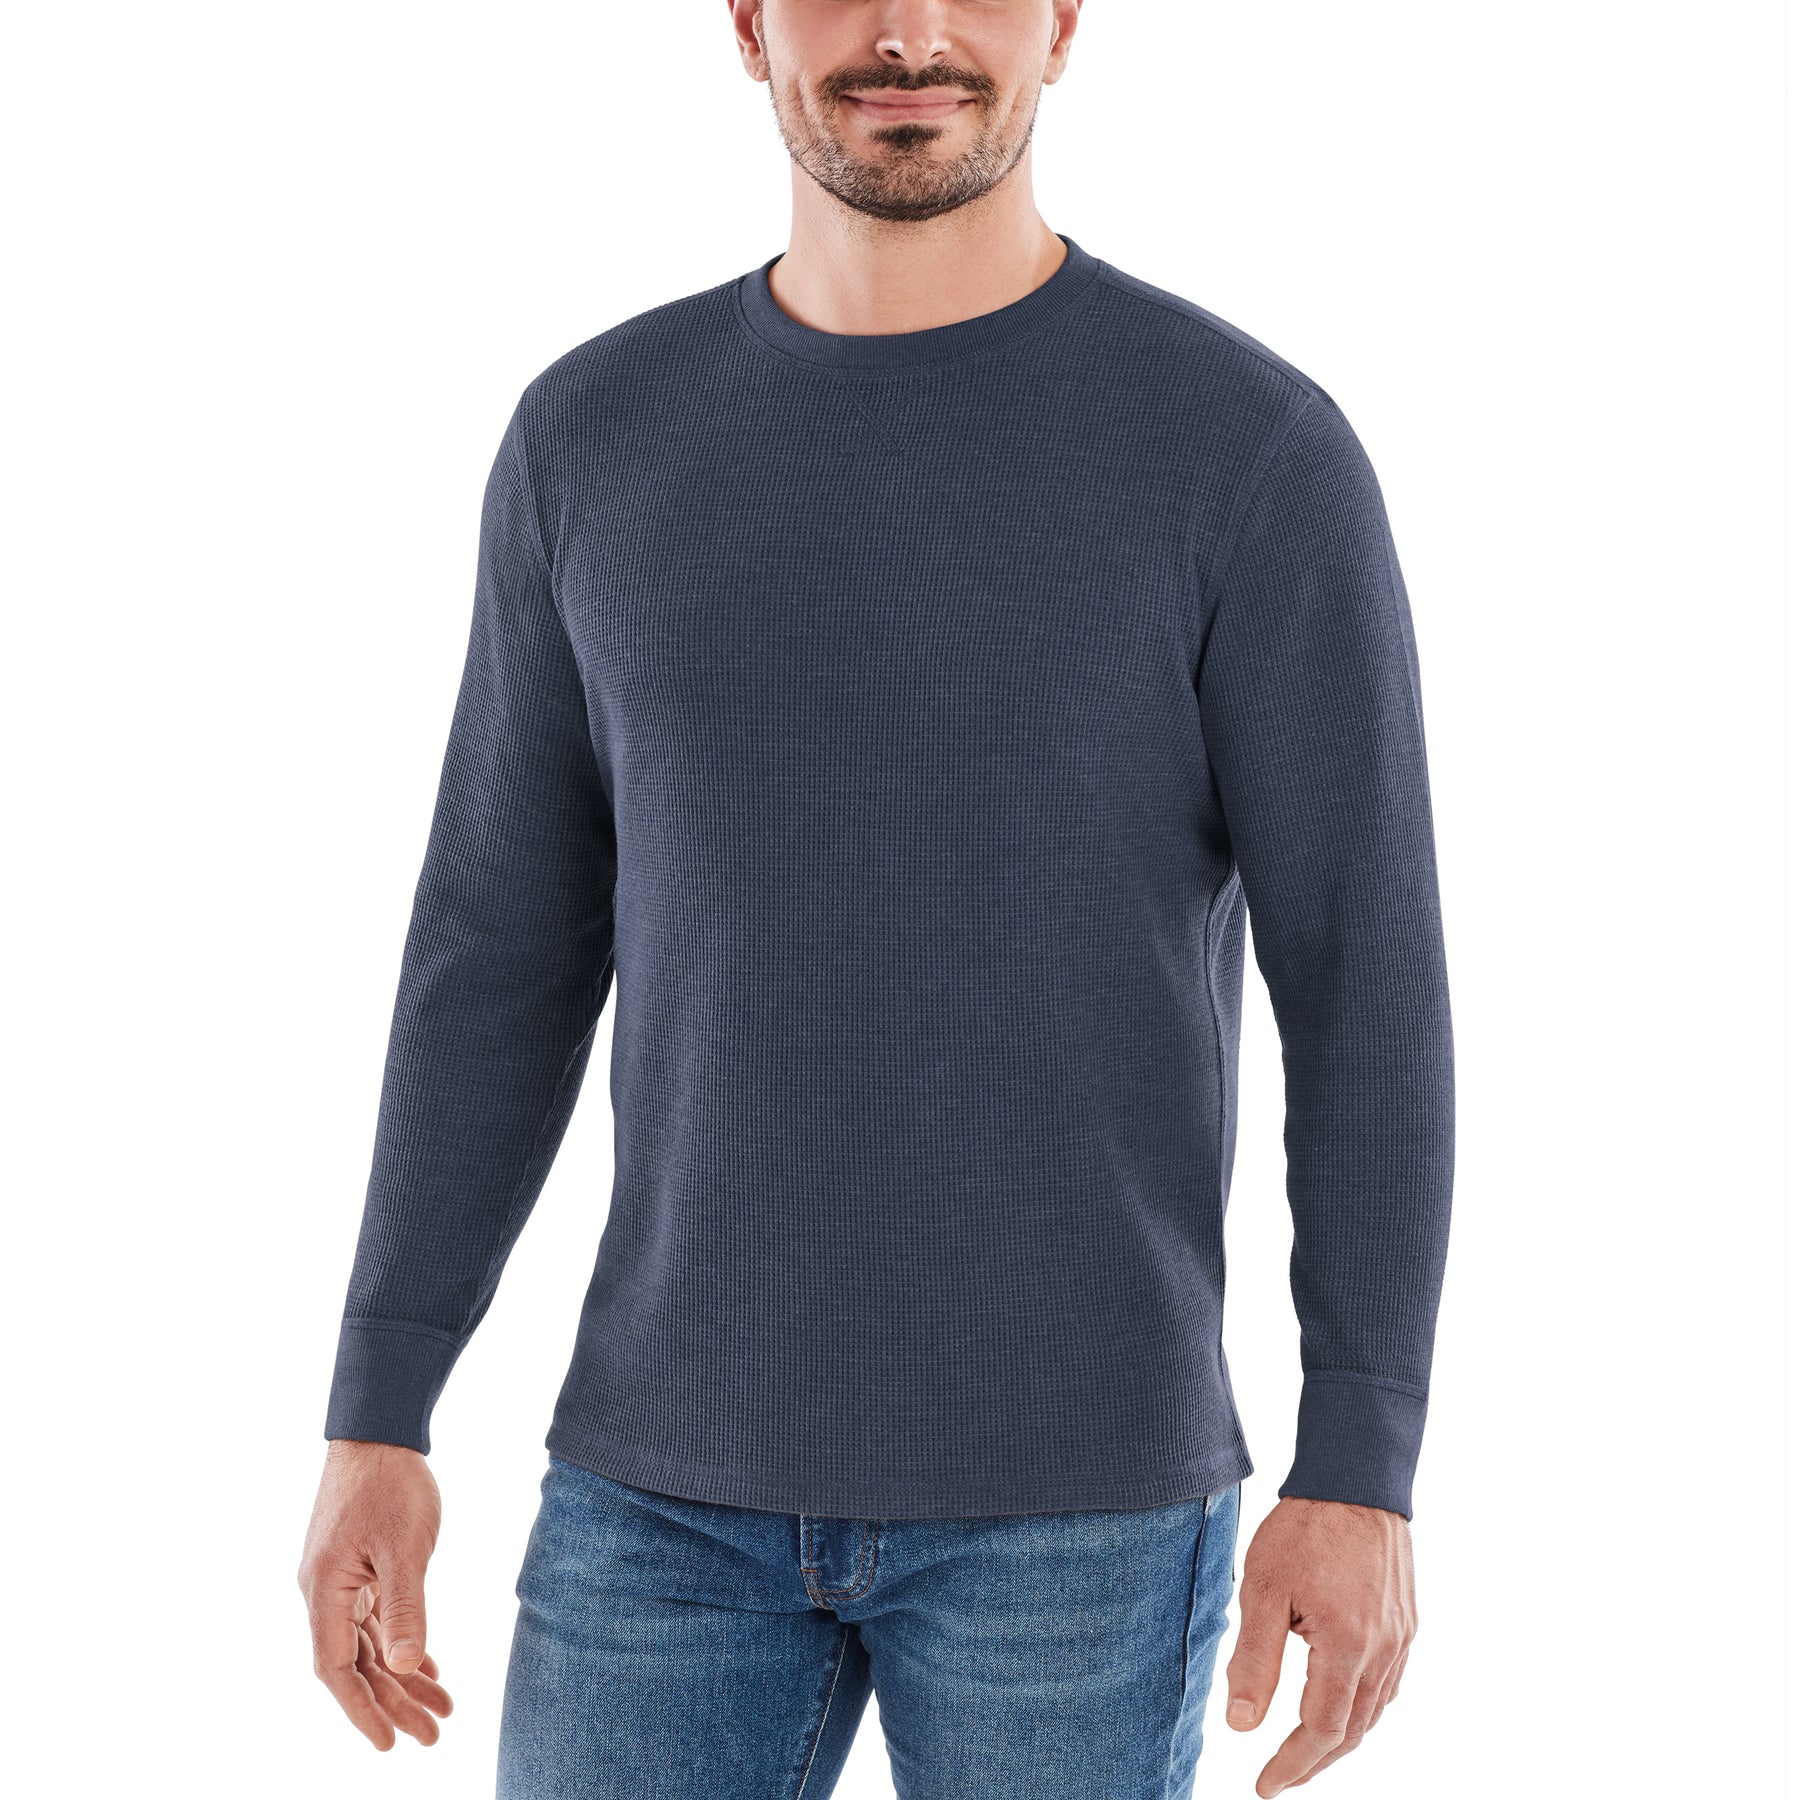 Versatile Men's Waffle Thermal Top Long Sleeve Crew Neck Shirt for Daily  Wear 